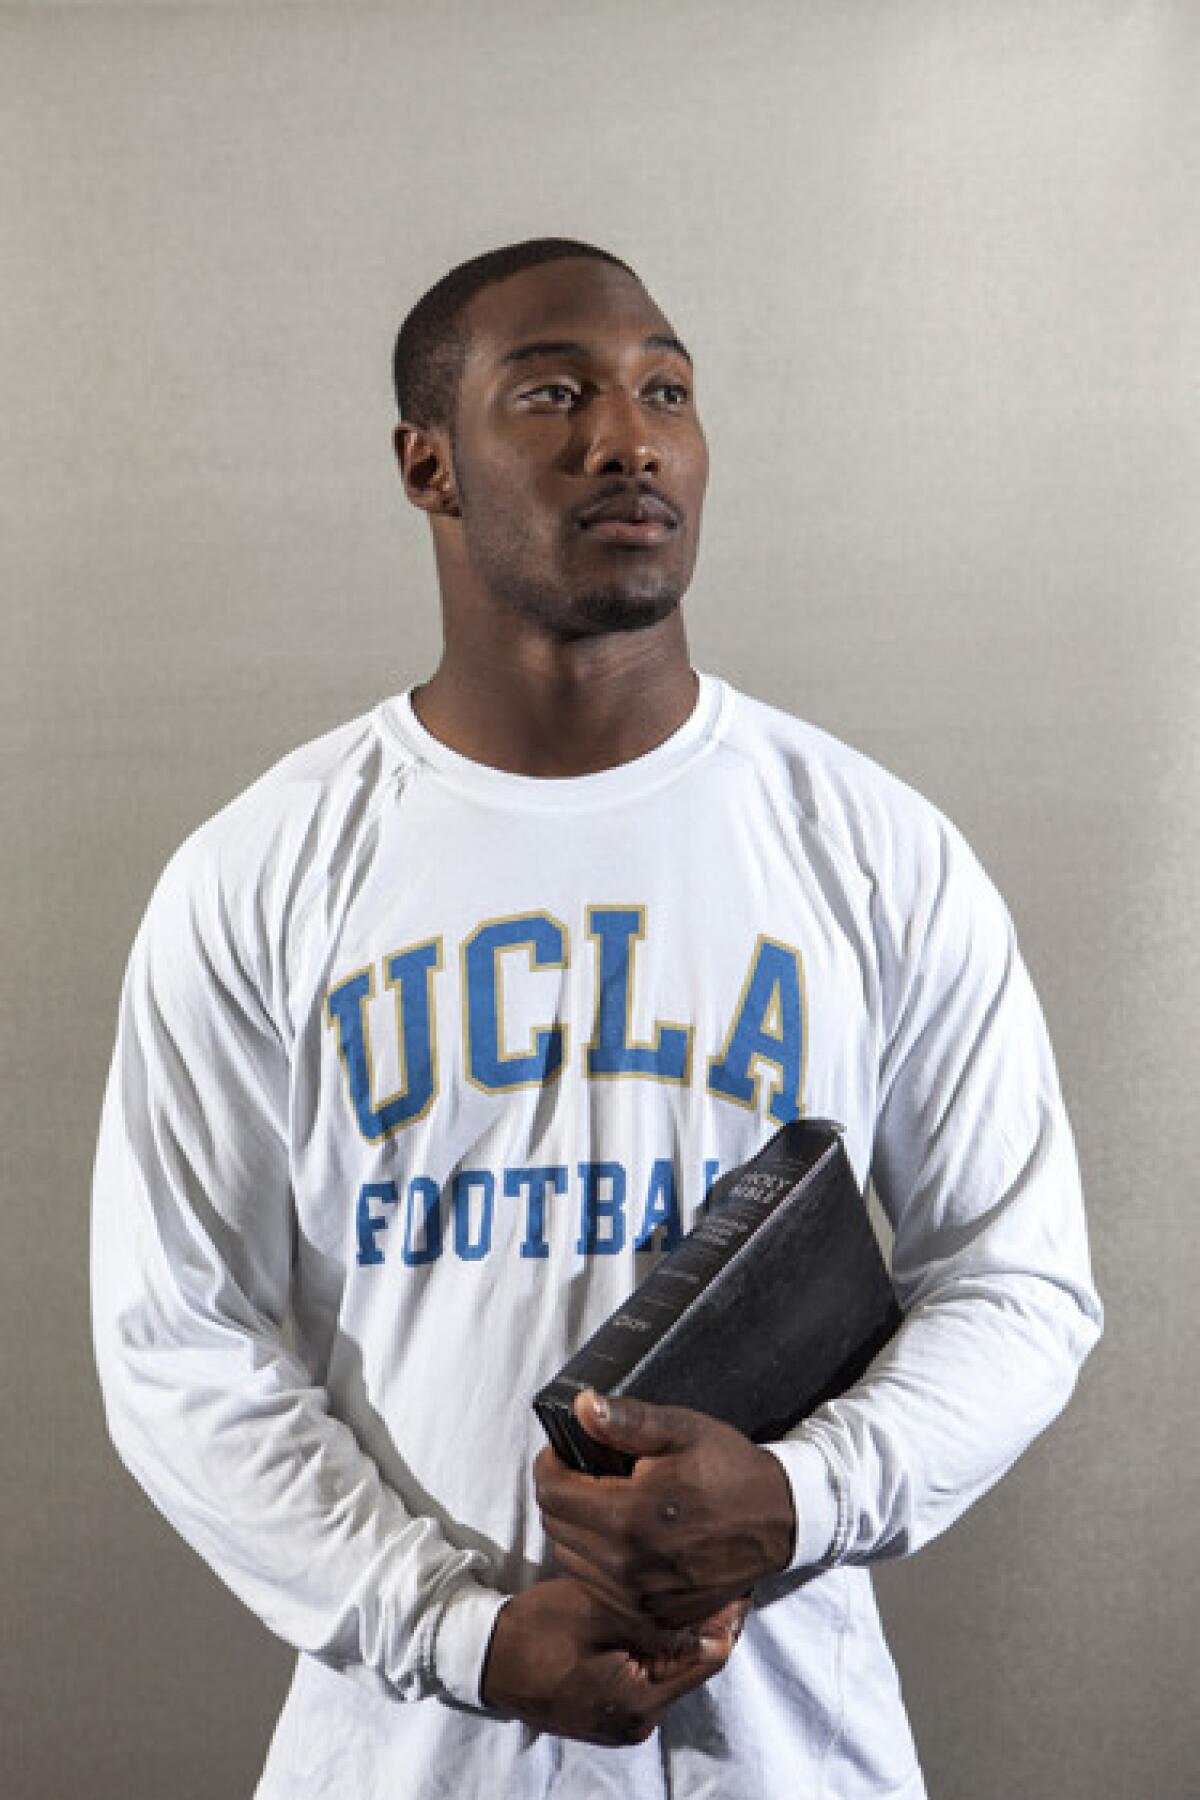 Johnathan Franklin, a senior running back on UCLA's football team, is photographed holding a Bible and football.